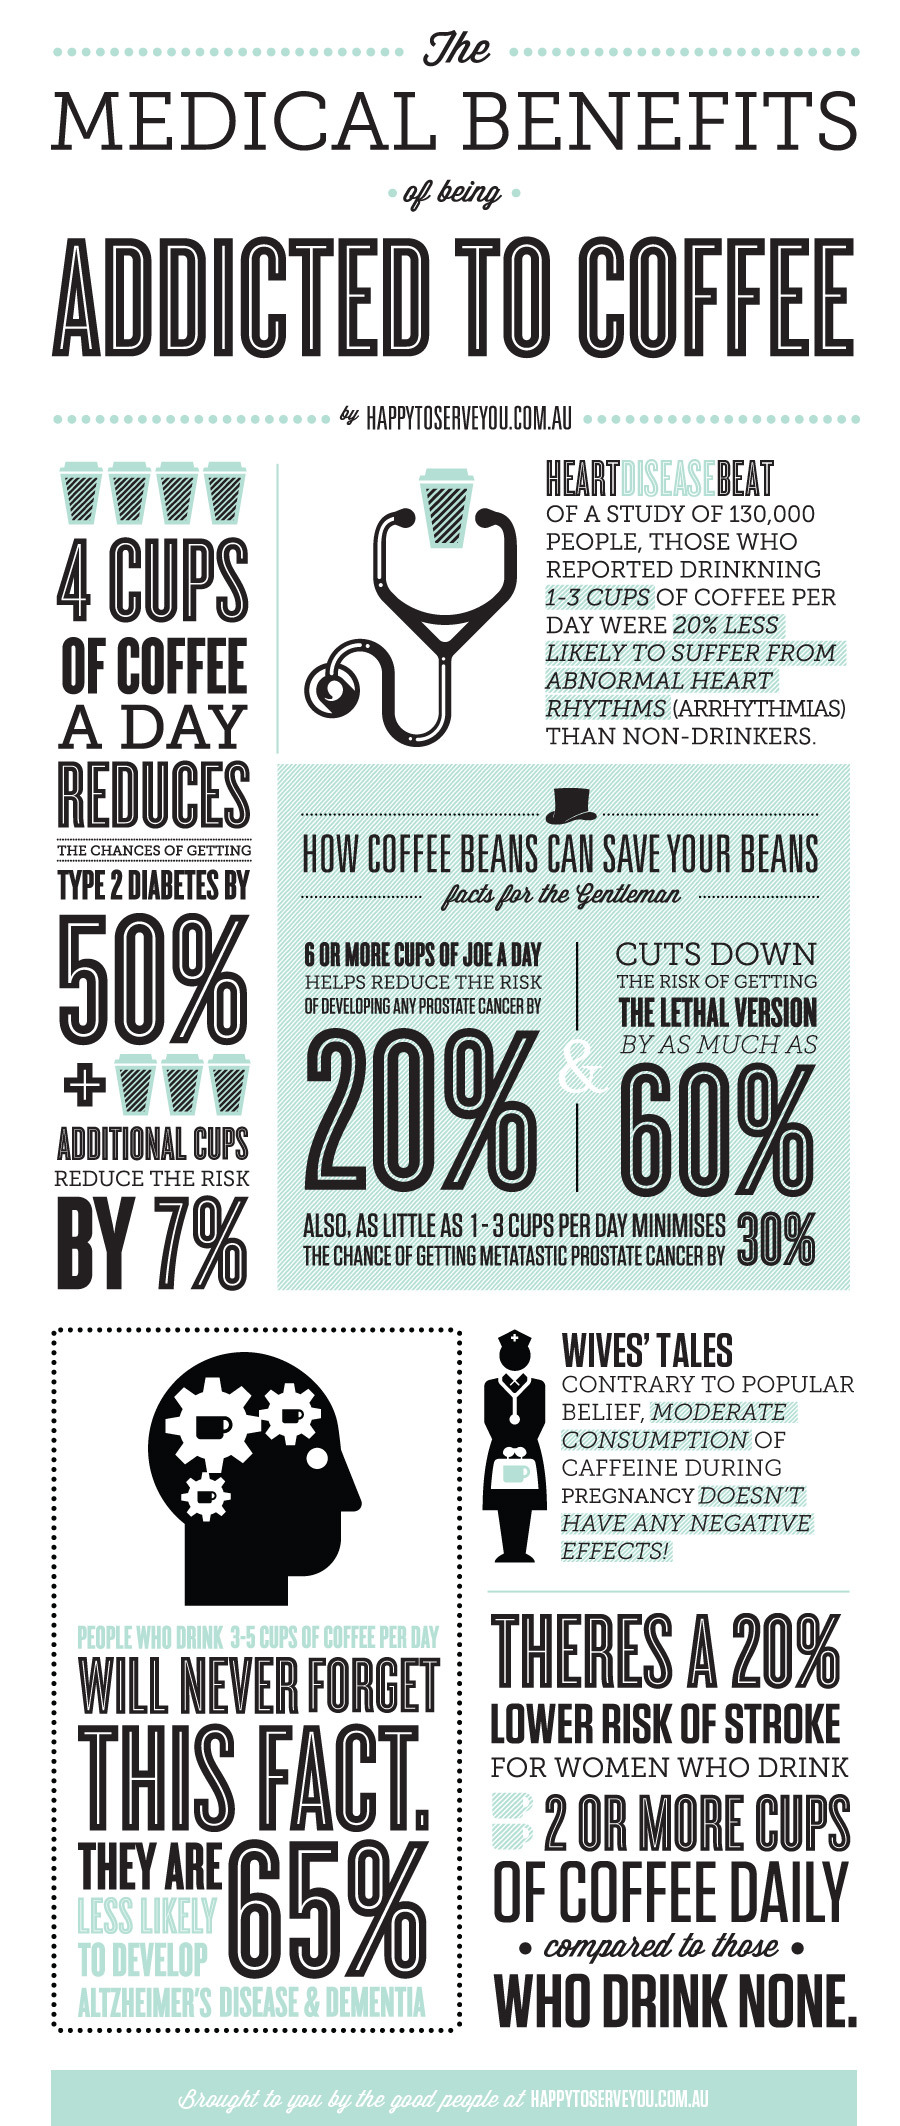 MEDICAL-BENEFITS-OF-BEING-A-COFFEE-ADDICT